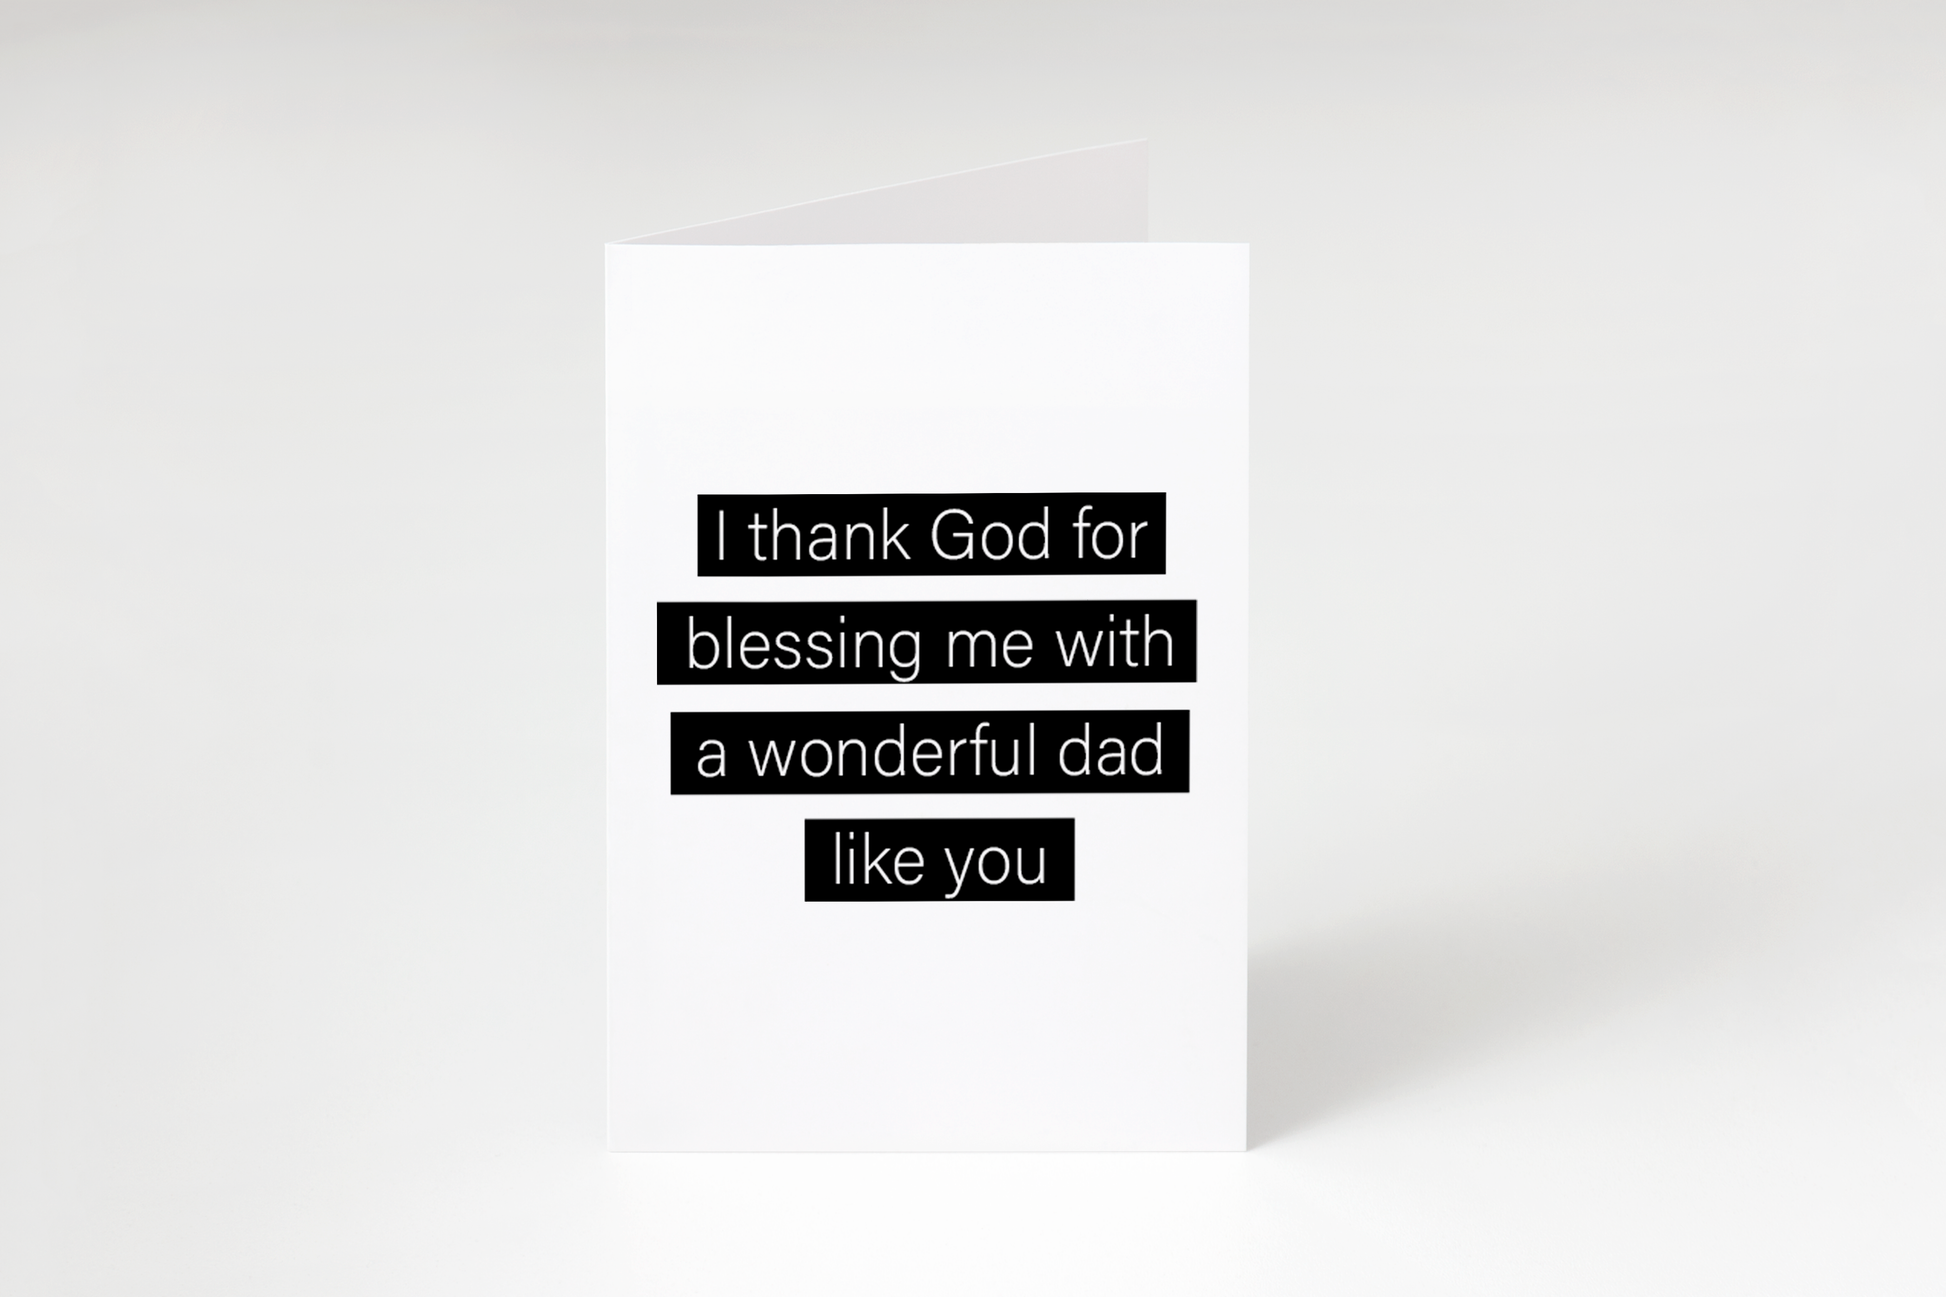 I thank God for blessing me with a dad like you card - Faith Curated